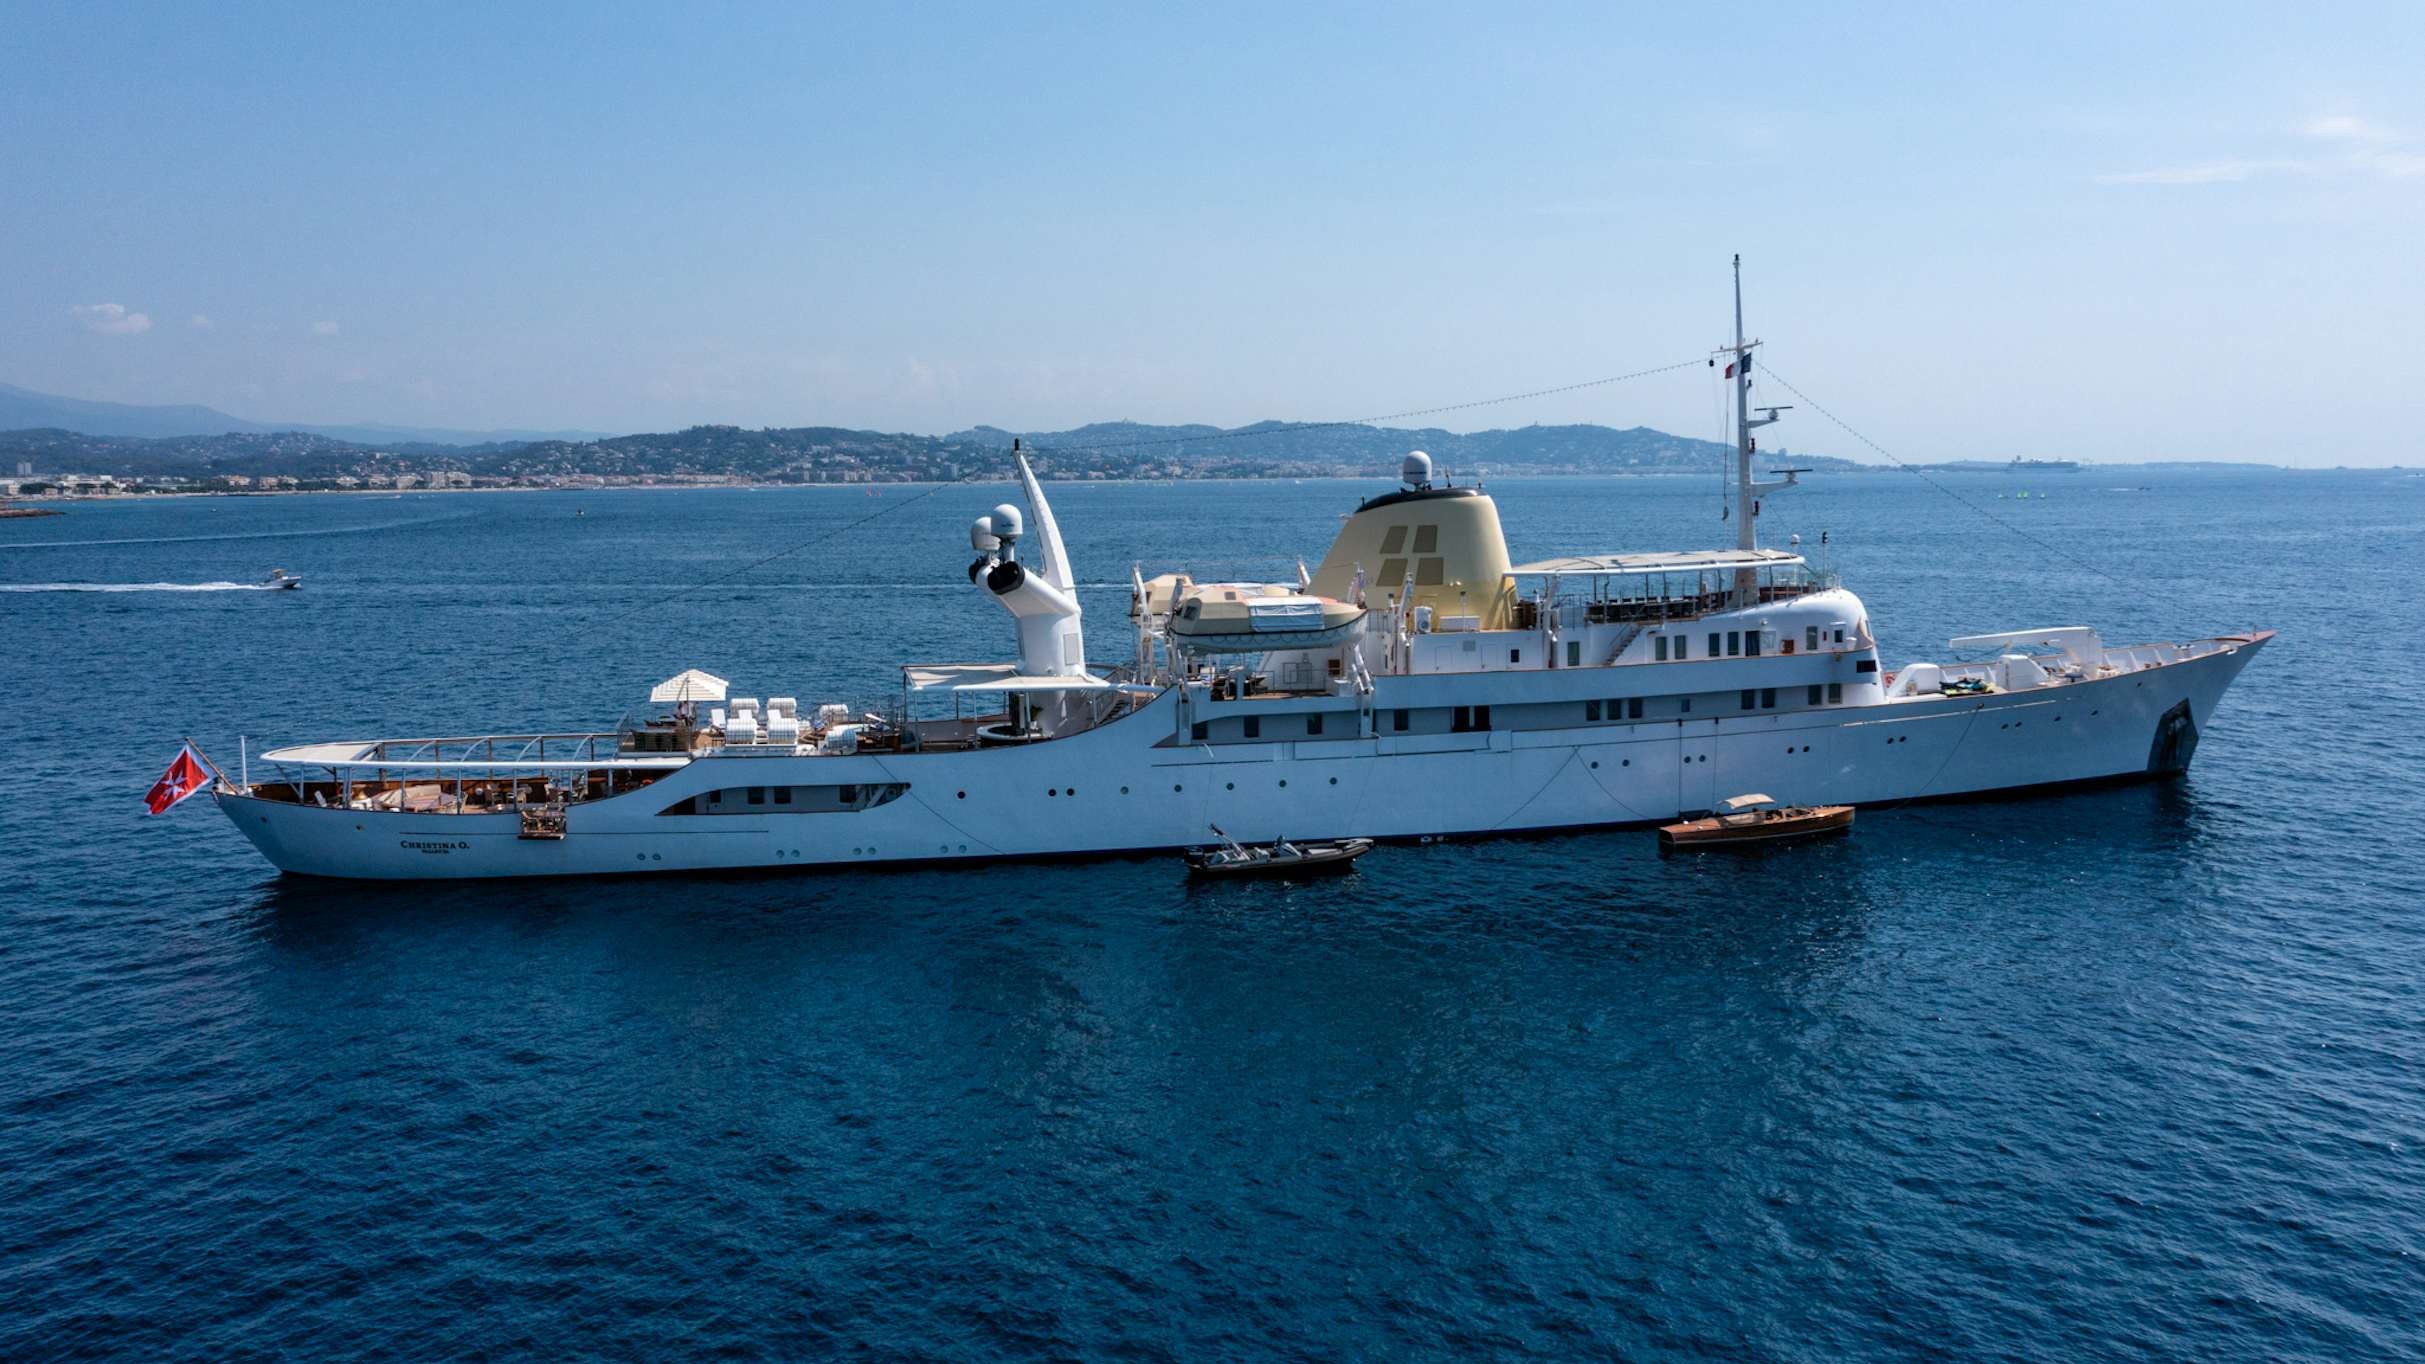 Watch Video for CHRISTINA O Yacht for Charter